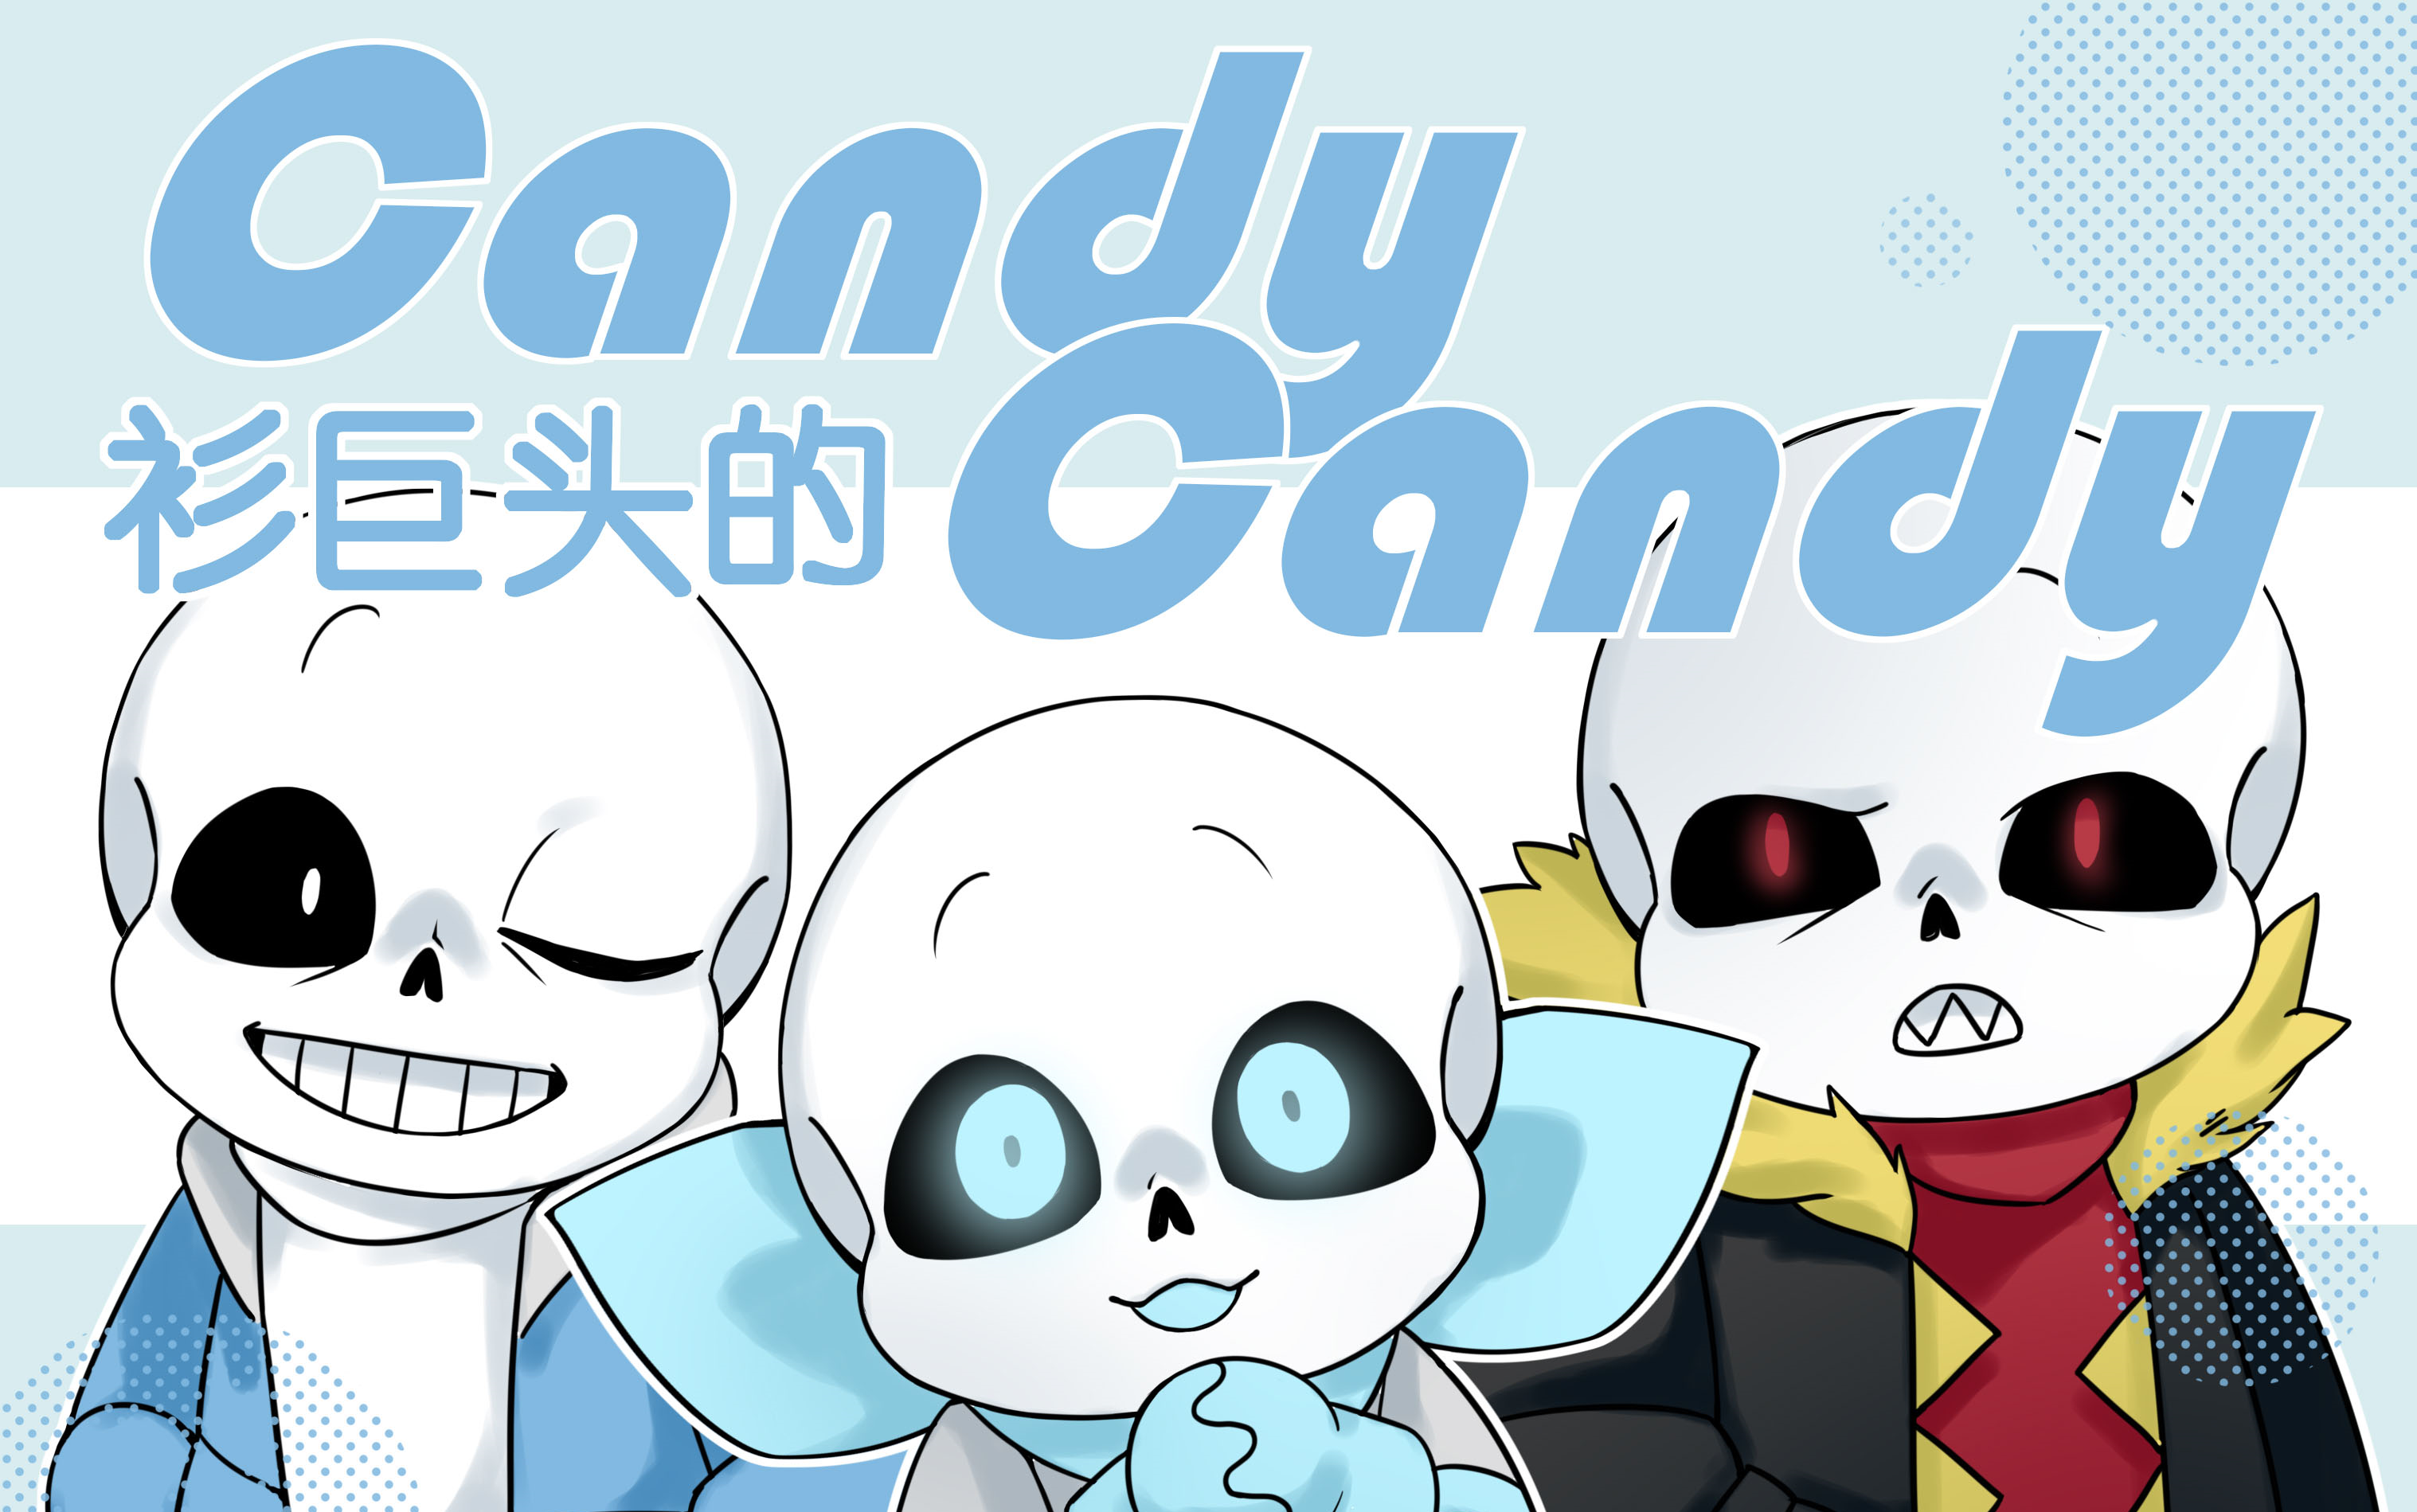 candytale图片